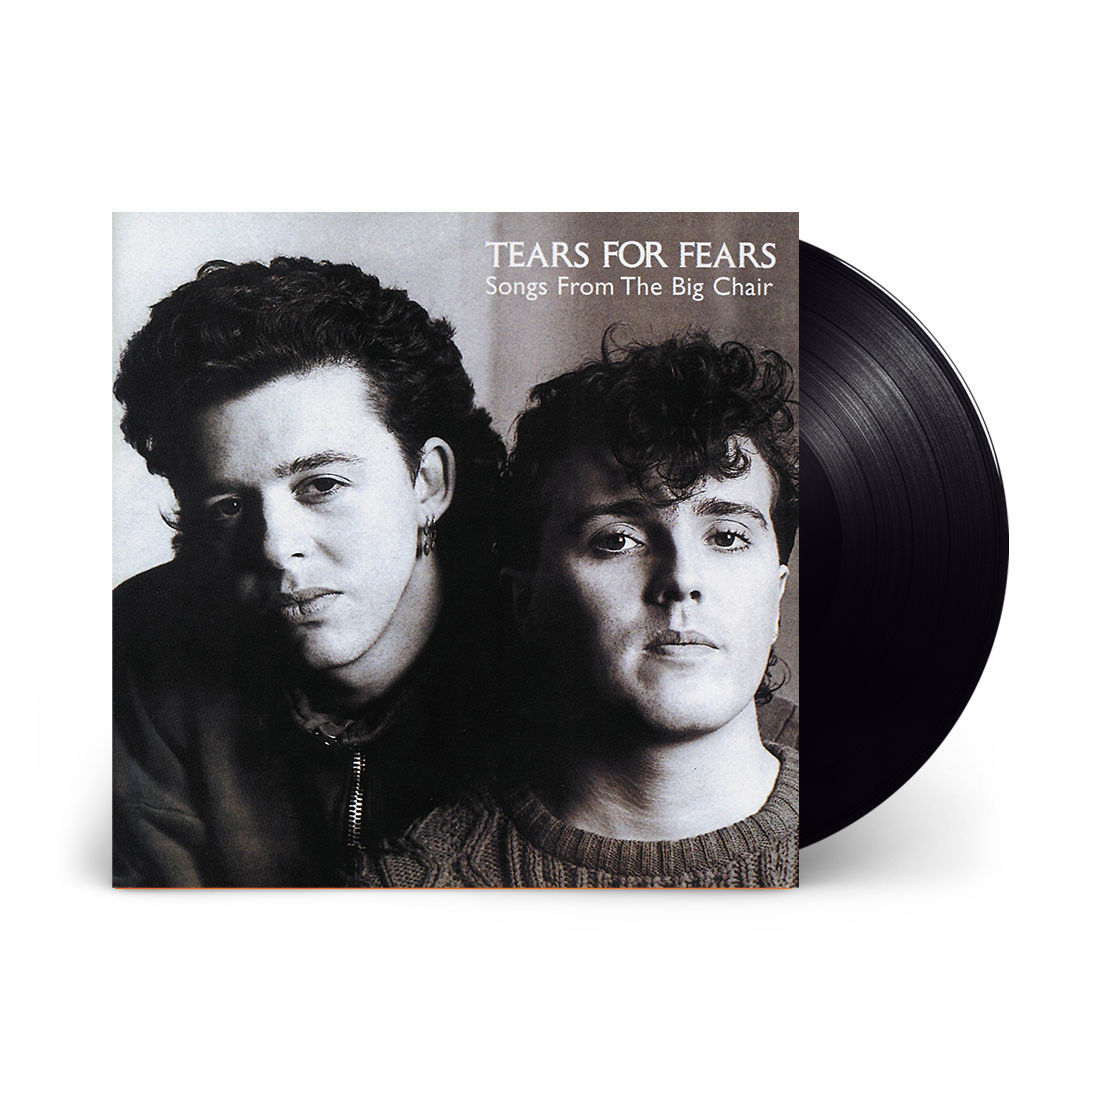 Tears For Fears Songs from The Big Chair: Vinyl LP uDiscover